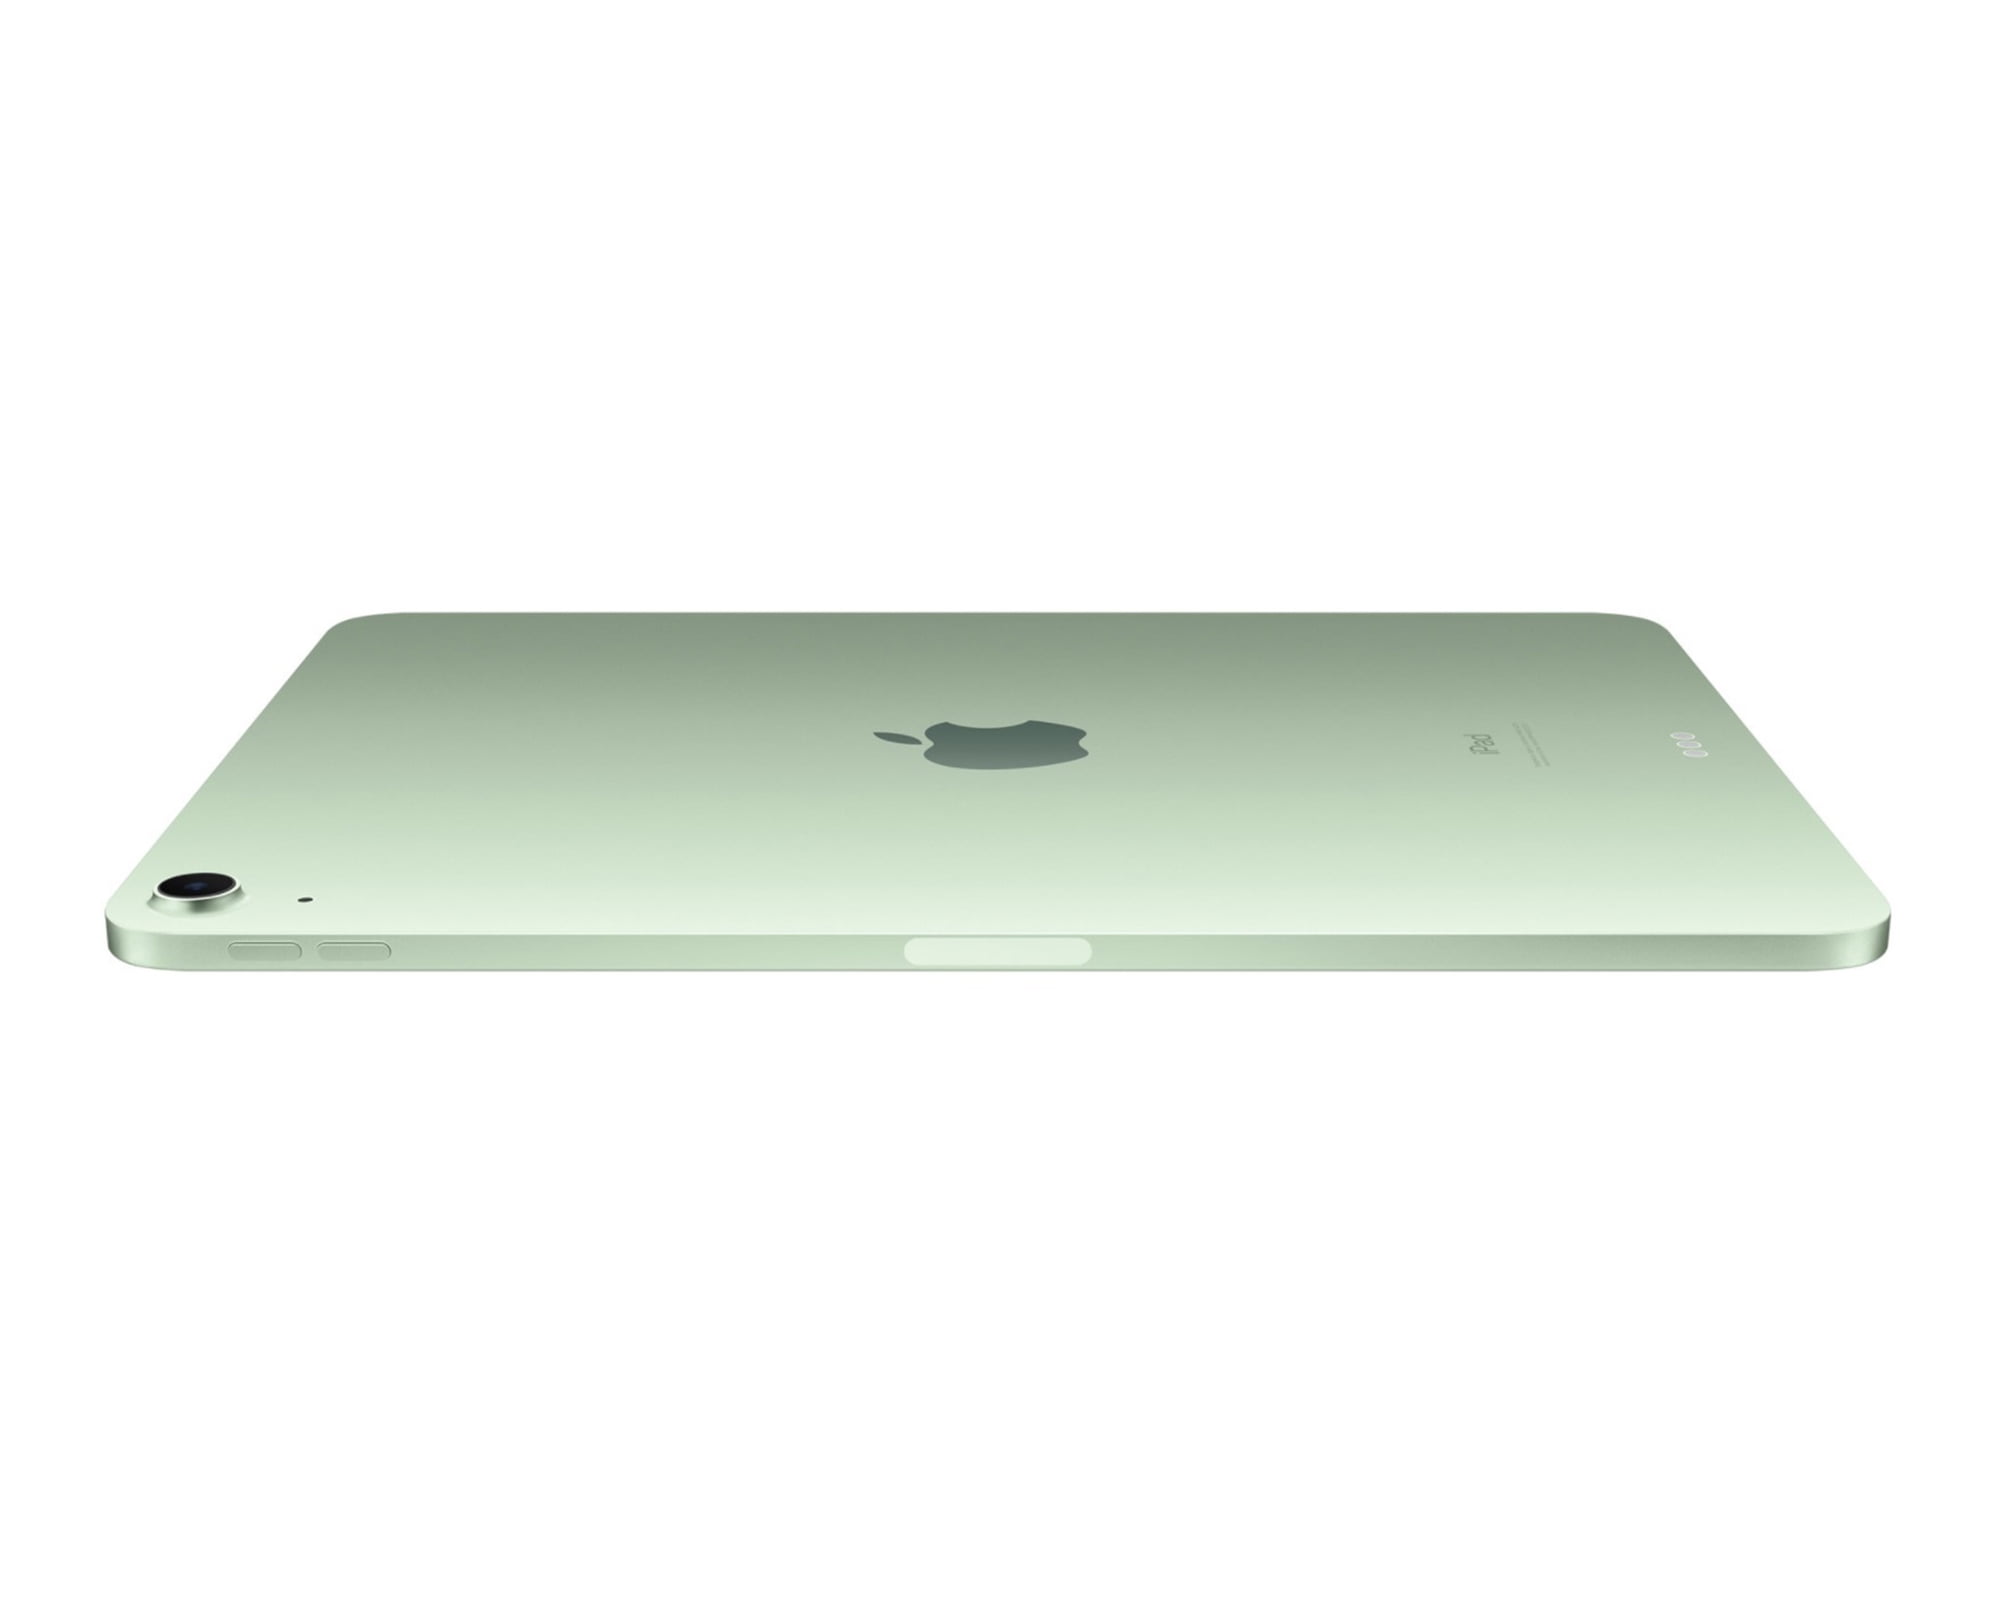 Apple iPad Air 4th Gen. 64GB, Wi-Fi, 10.9 in - Green for sale online